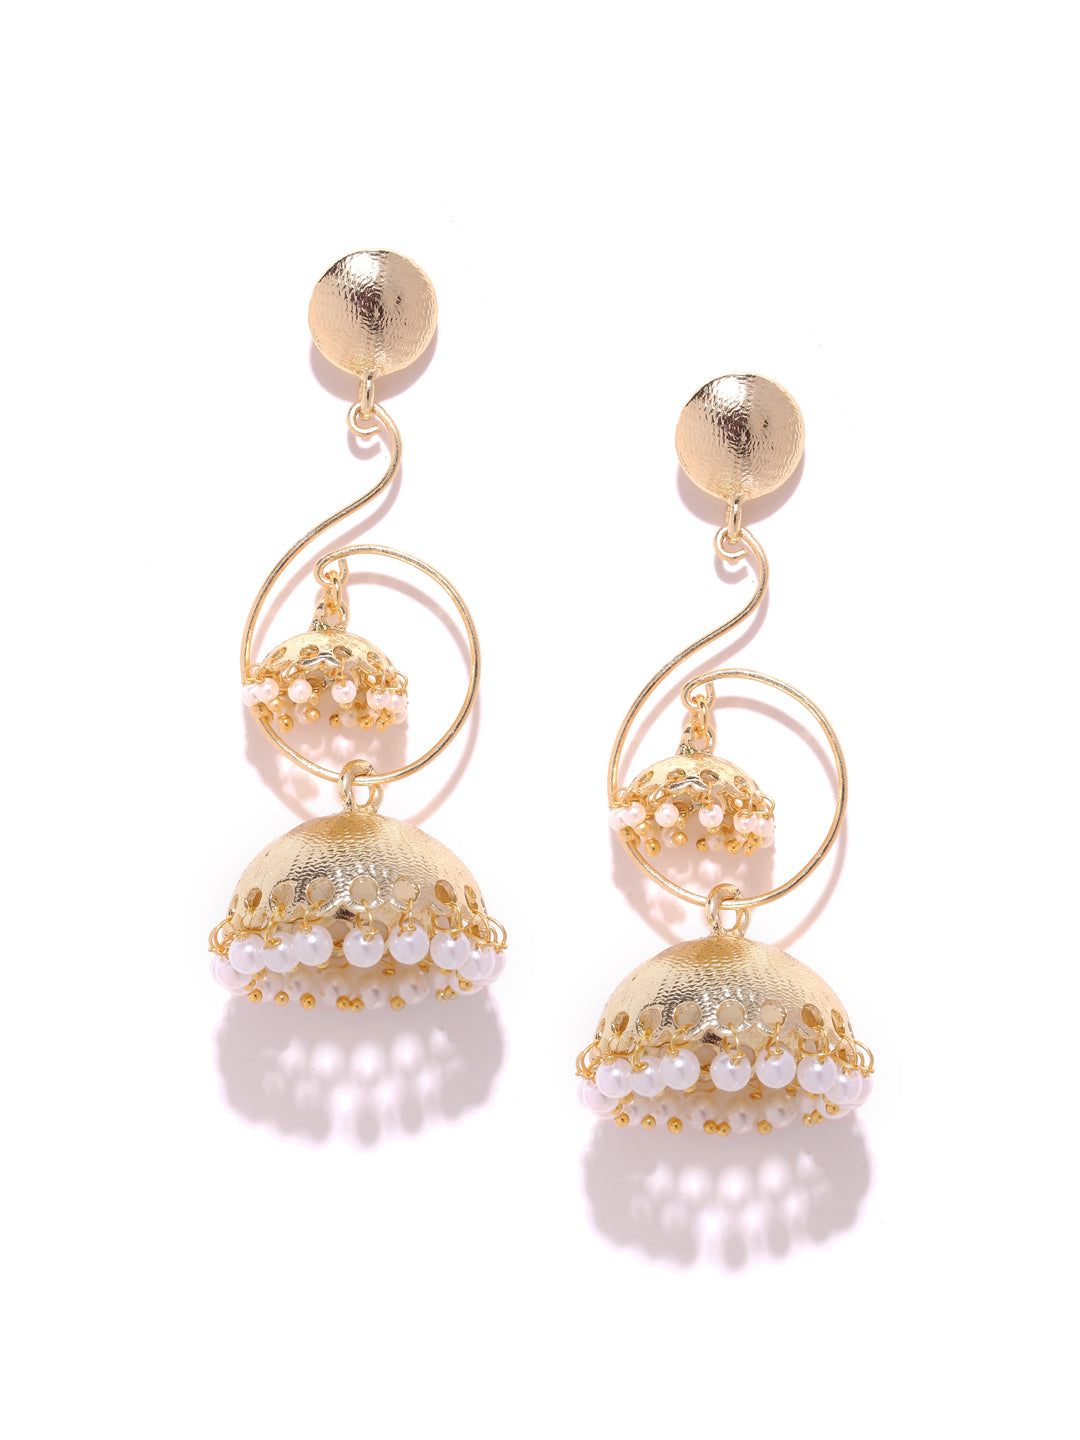 Gold plated handcrafted jhumki drop earrings